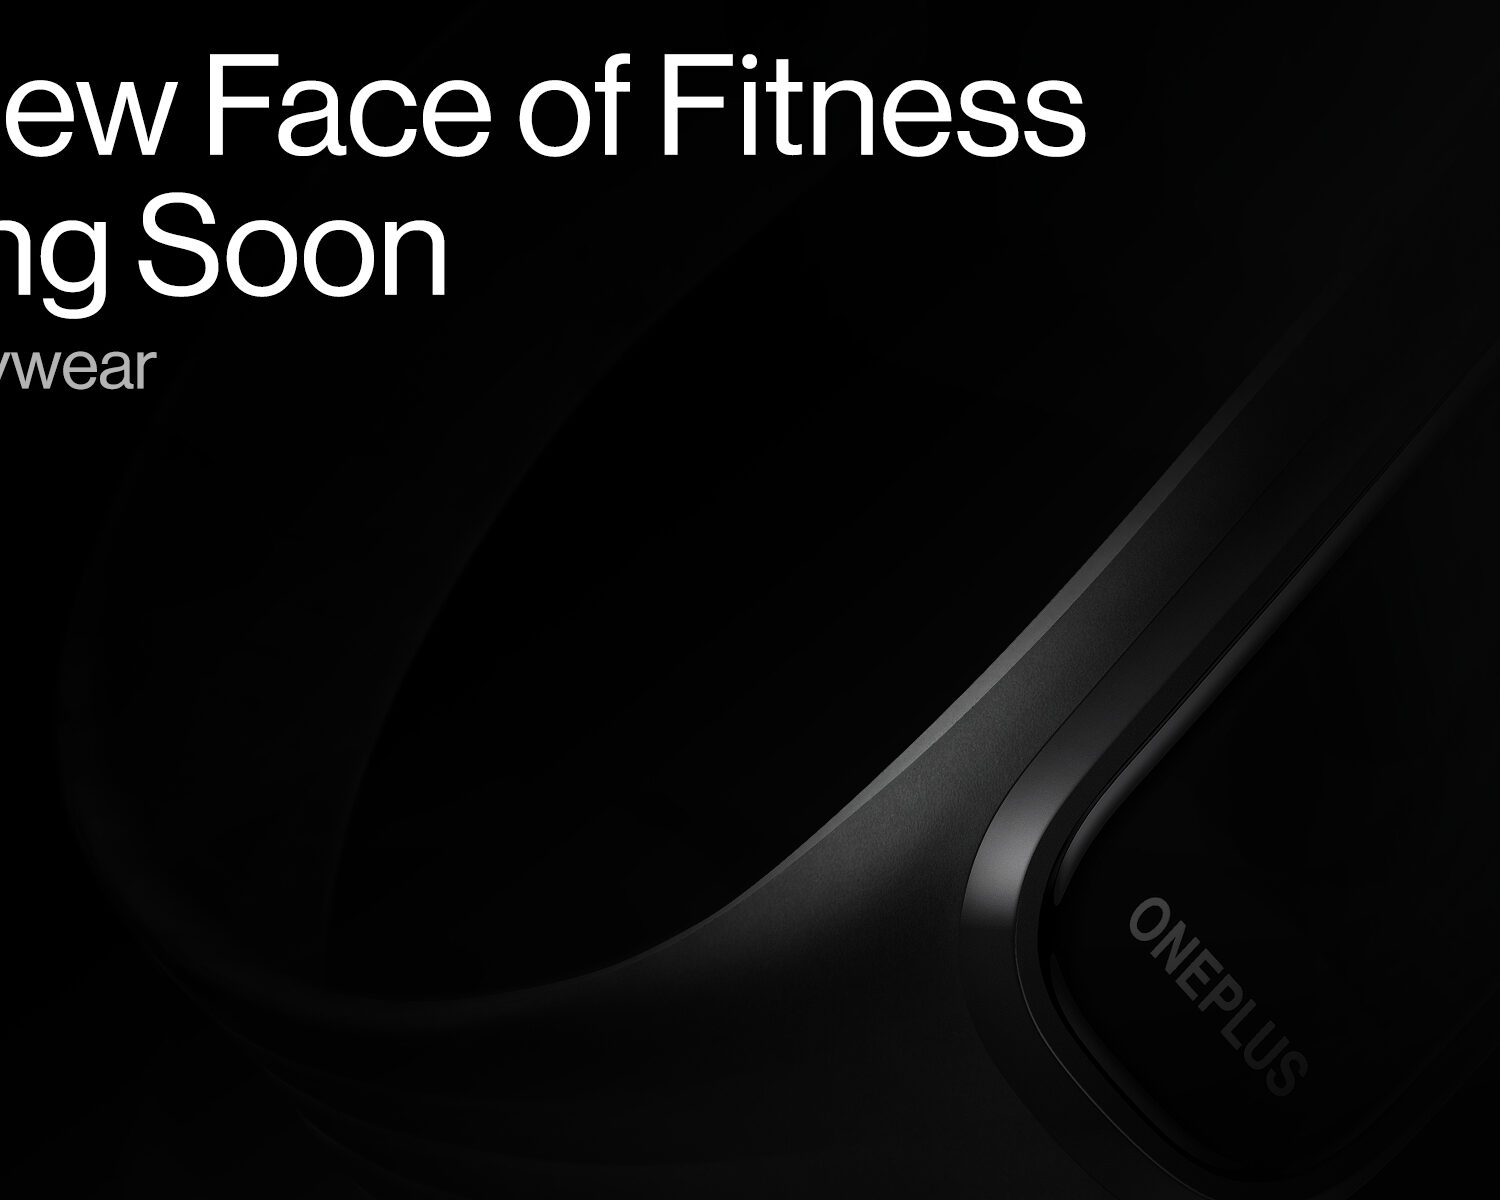 OnePlus is entering to fitness segment with the OnePlus Band